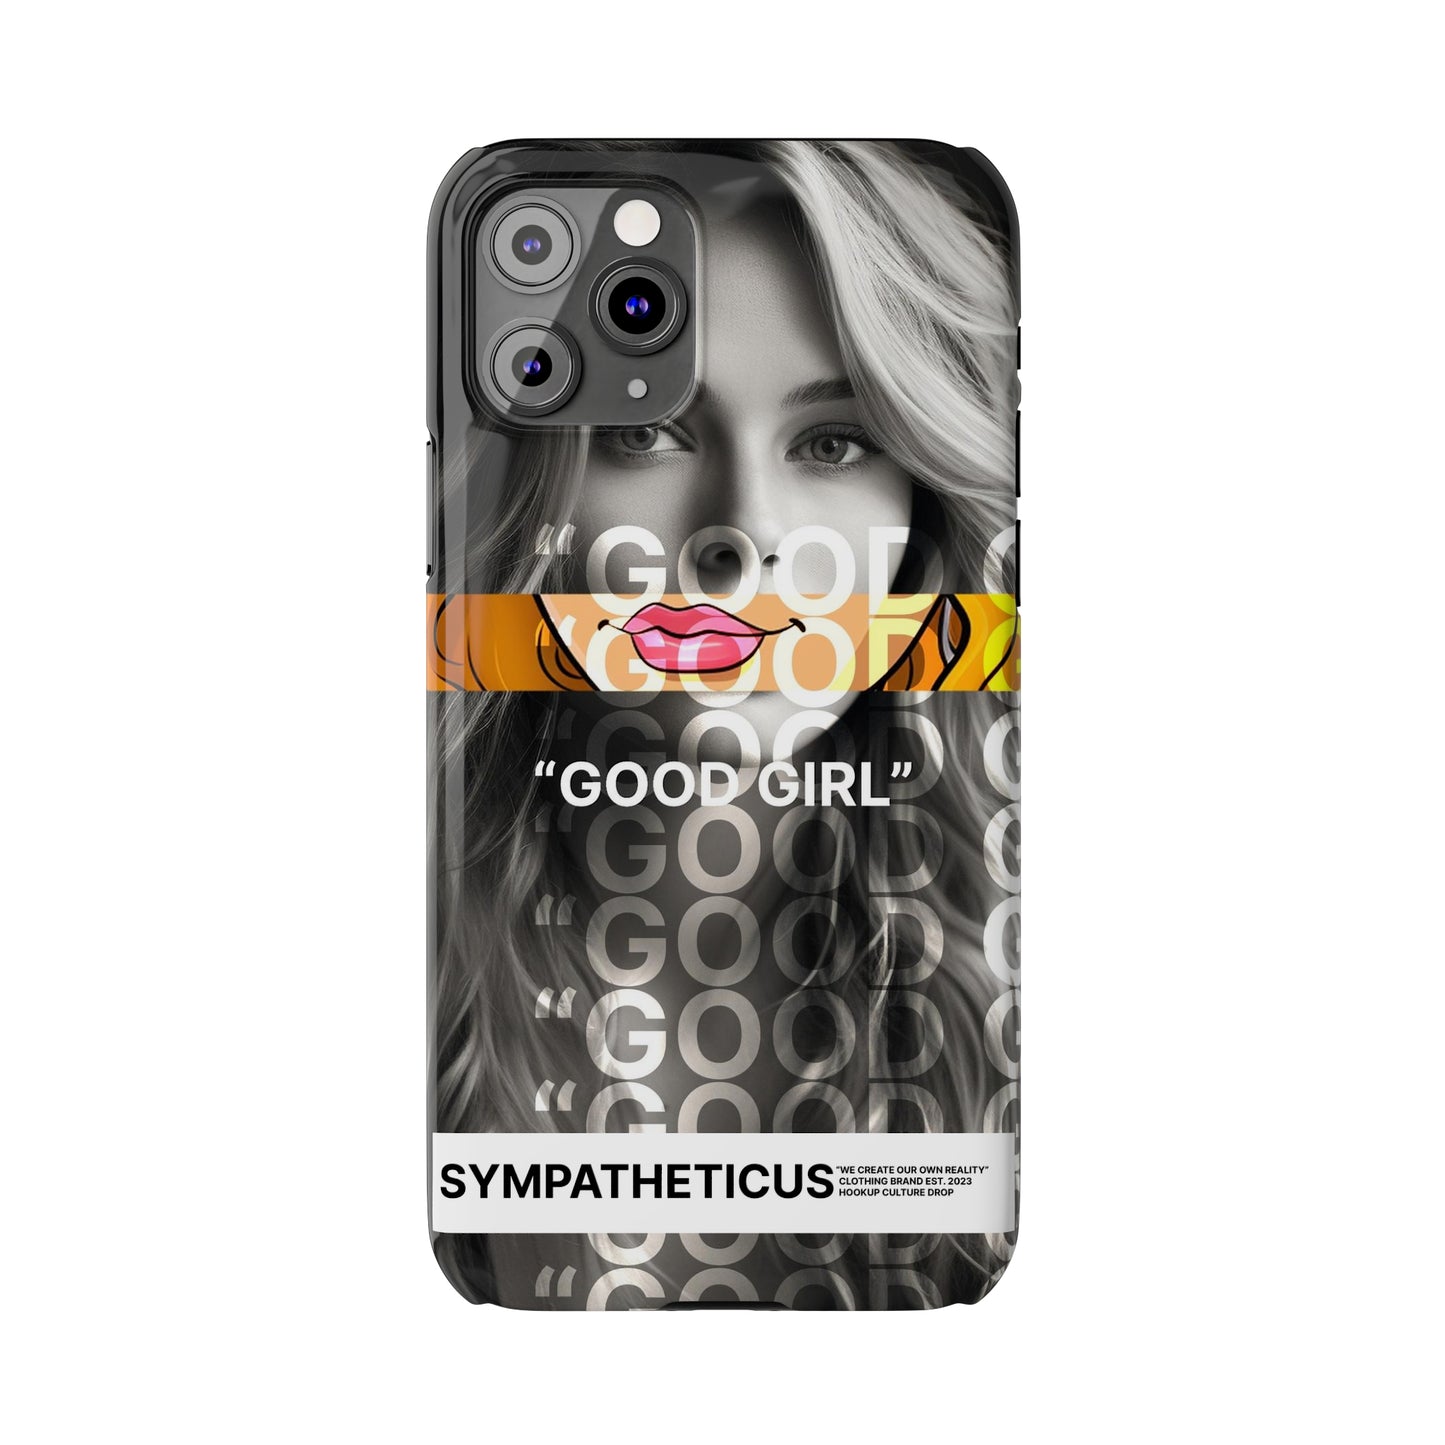 Hookup culture special iphone case-12